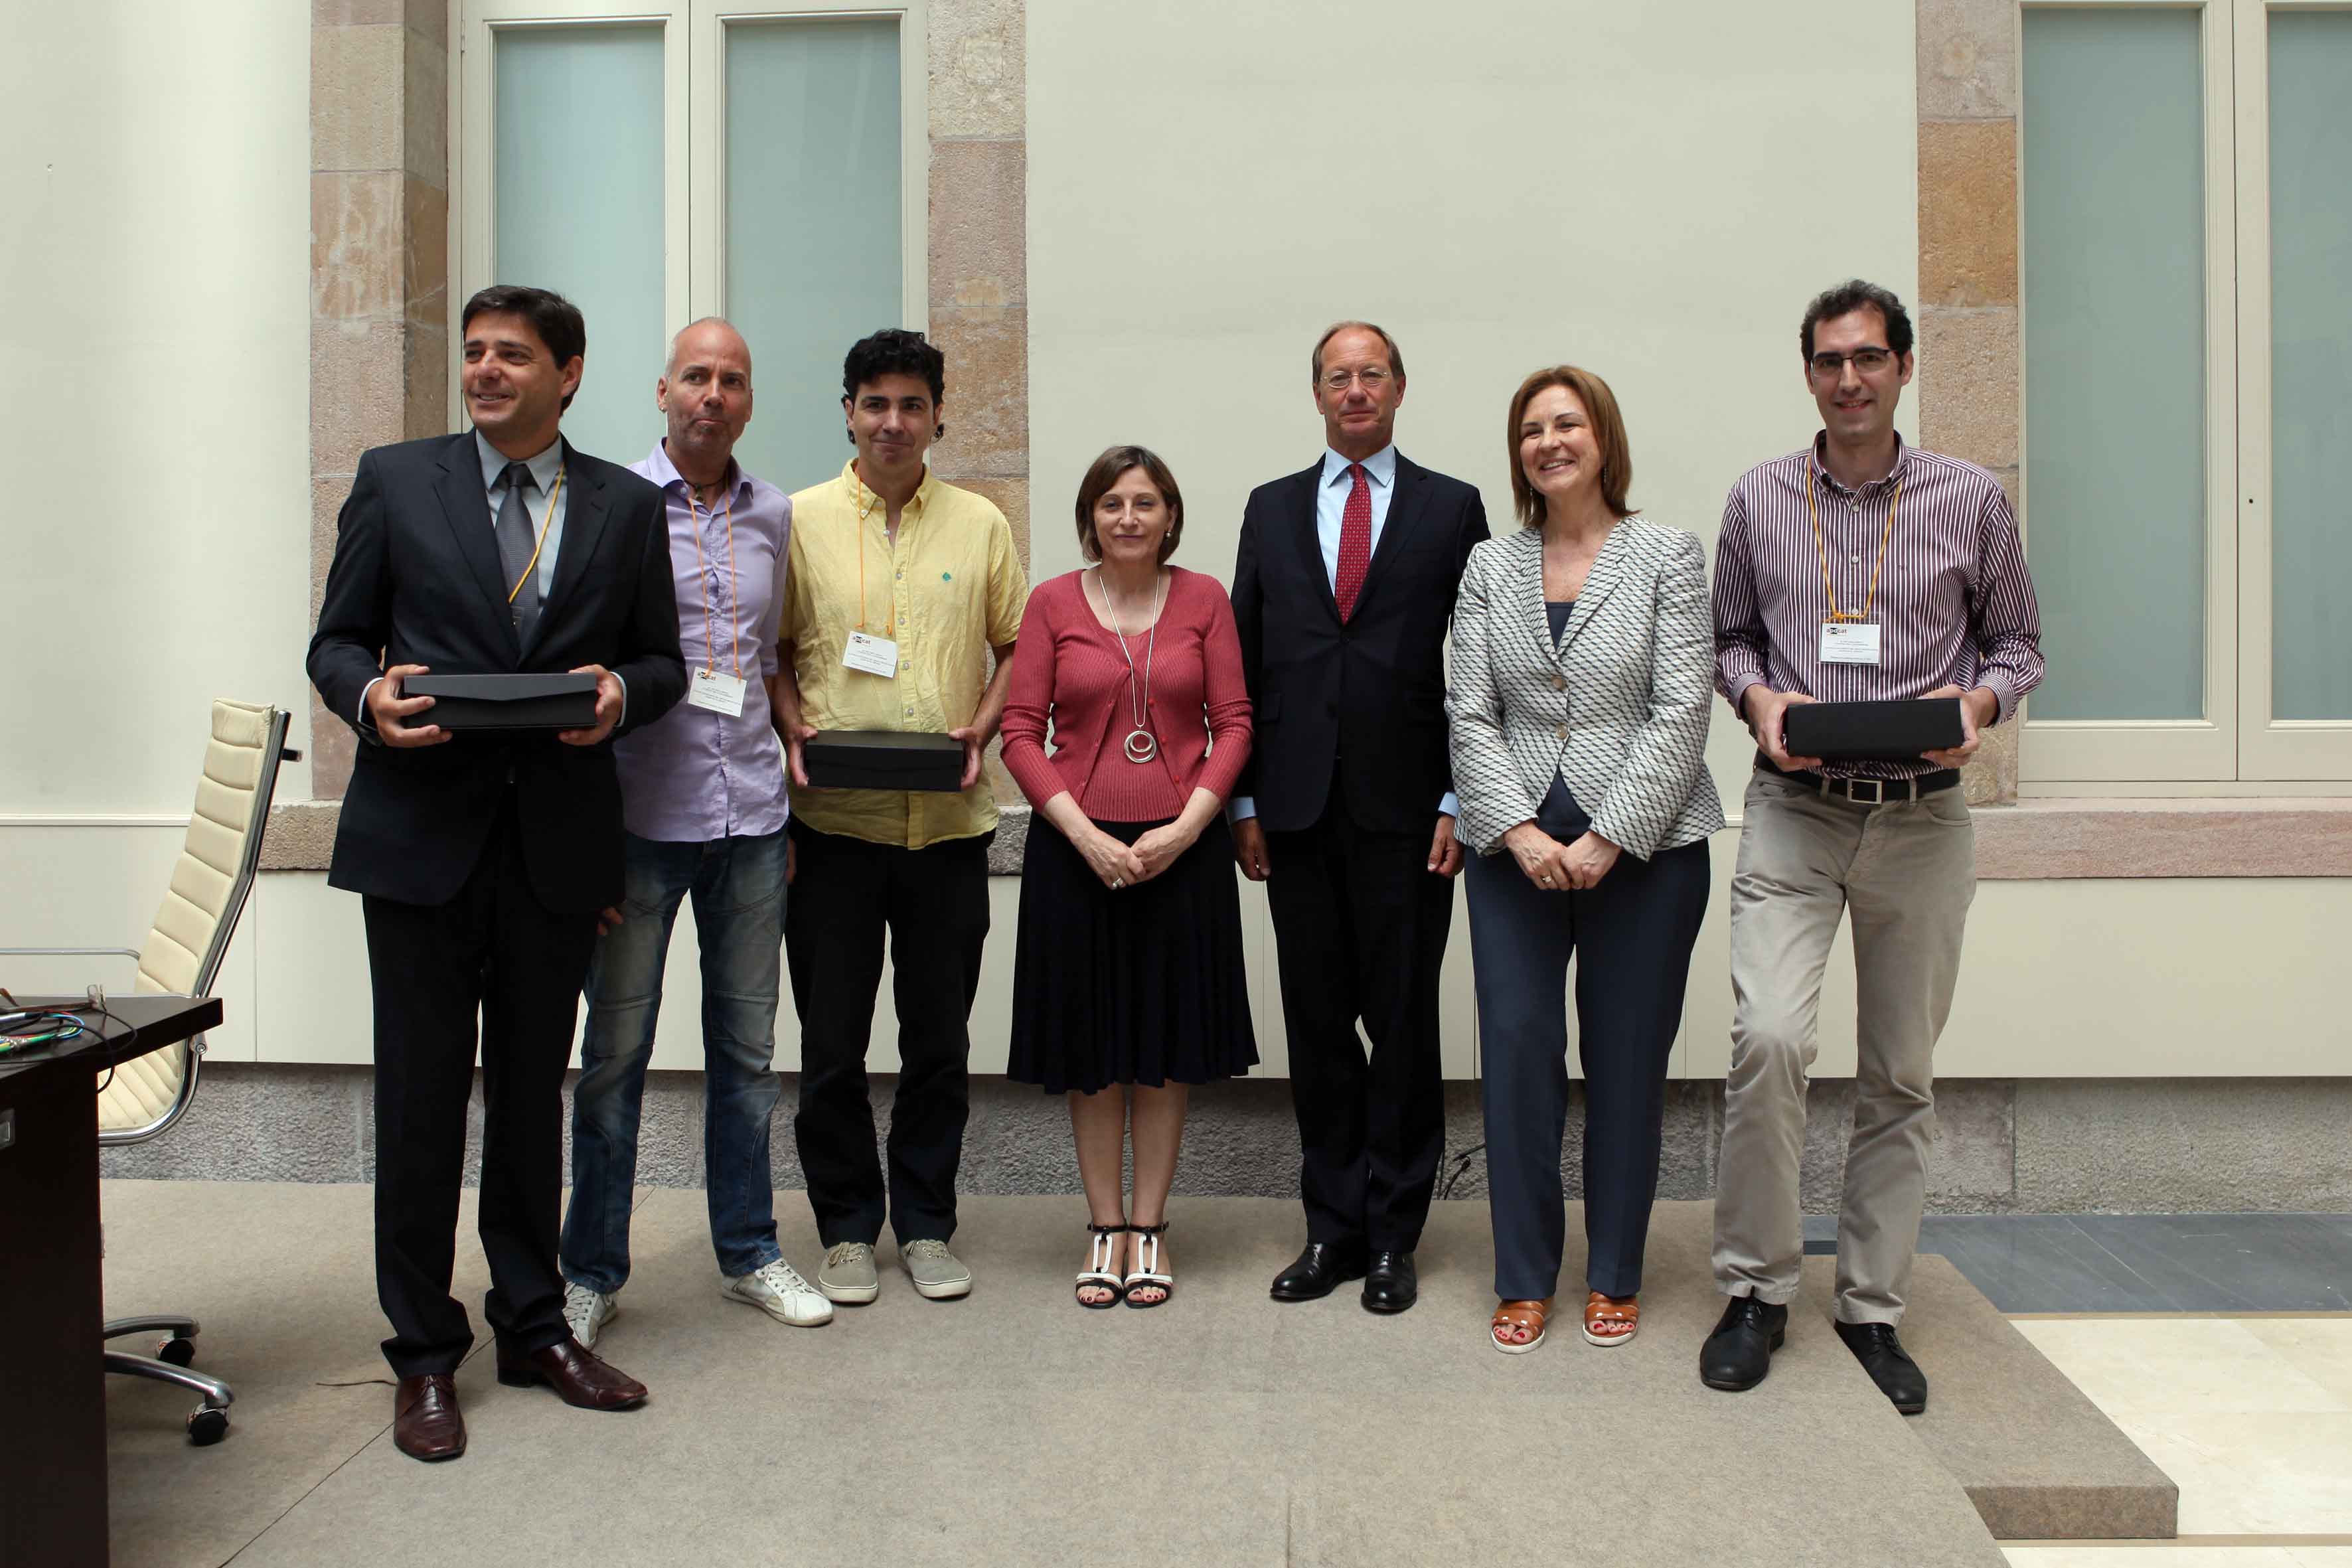 The prizewinners with the Speaker of the Catalan Parliament, H. Ms. Carme Forcadell, the APDCAT Director, Ms. Maria Àngels Barbarà and the Vice-Chairman of the Dutch Data Protection Authority, Mr. Wilbert Tomesen.